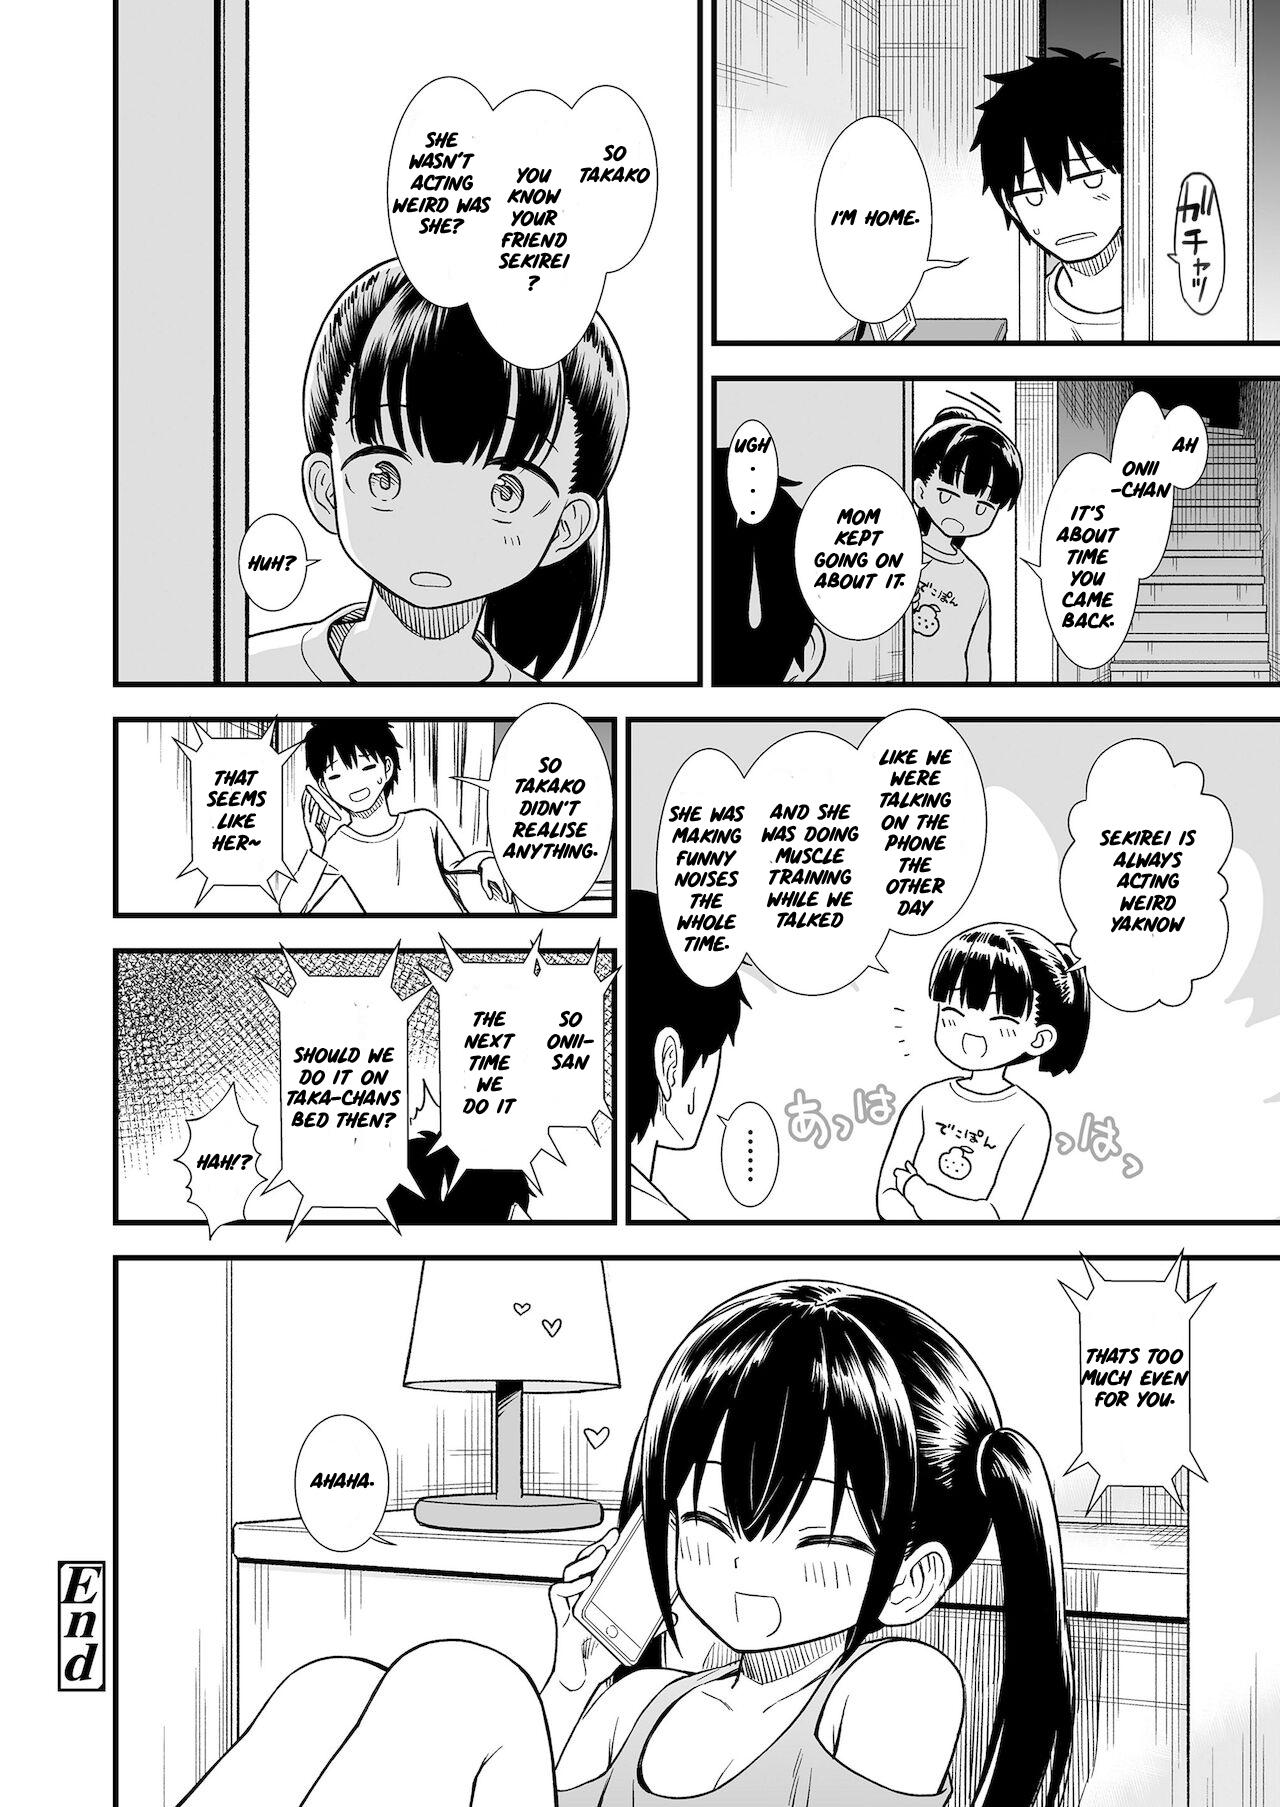 Stroking Imouto no Tomodachi Homecoming | My Little Sister's Friend Homecoming Facesitting - Page 24